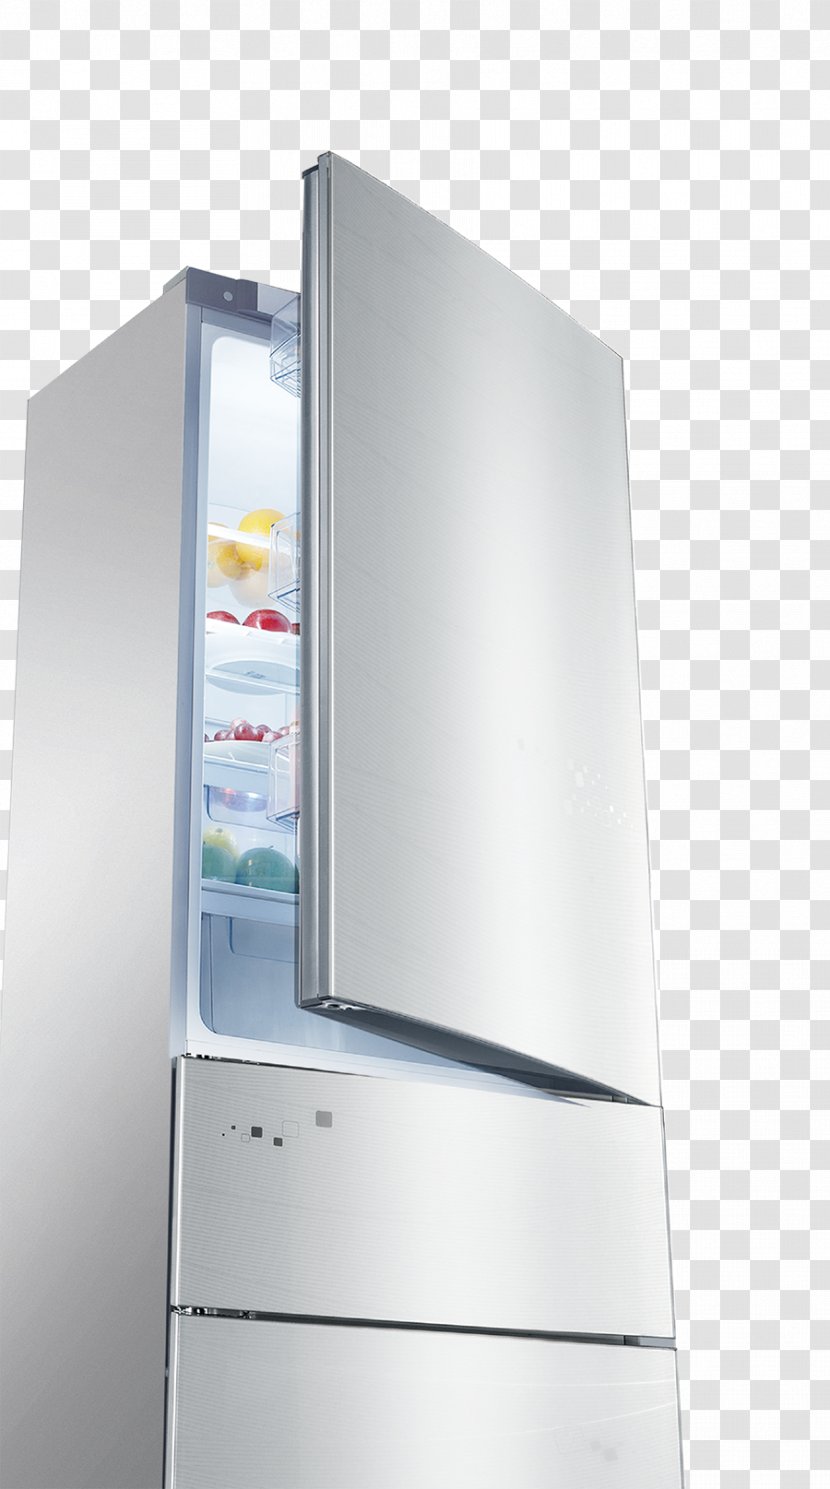 Refrigerator Home Appliance Kitchen Balay Congelador - Furniture - Quality Transparent PNG